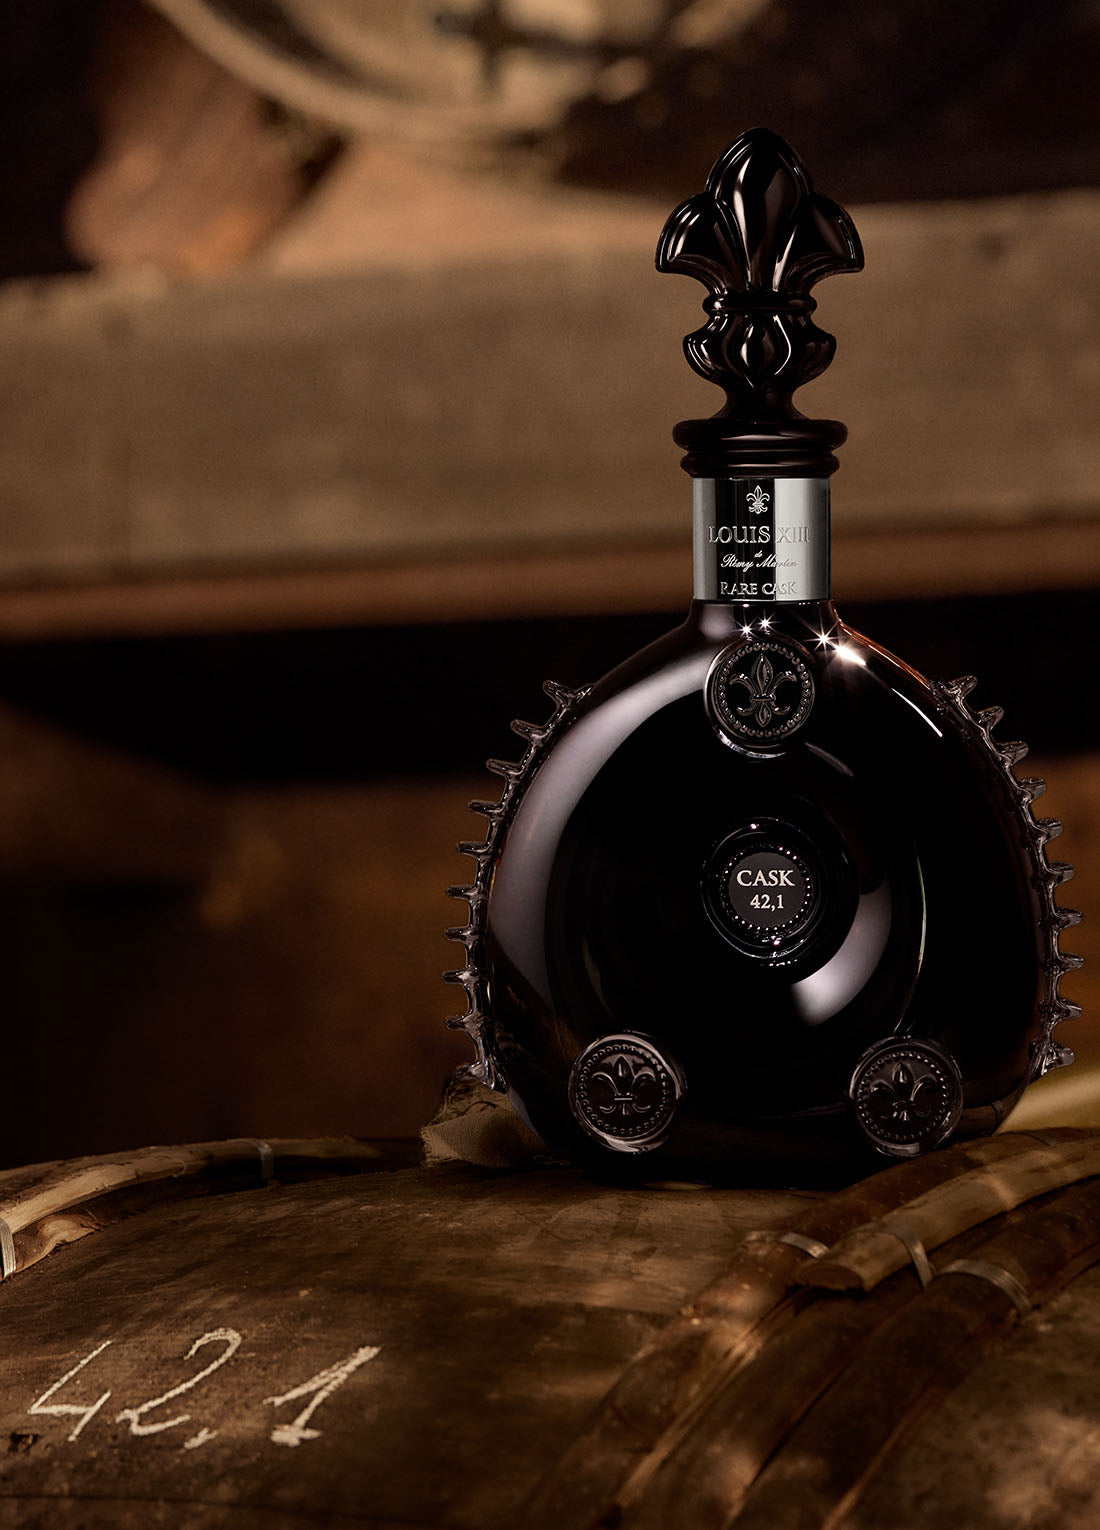 LOUIS XIII Rare Cask 42.1 - Limited Editions - Official Website LOUIS XIII  Cognac - Official website